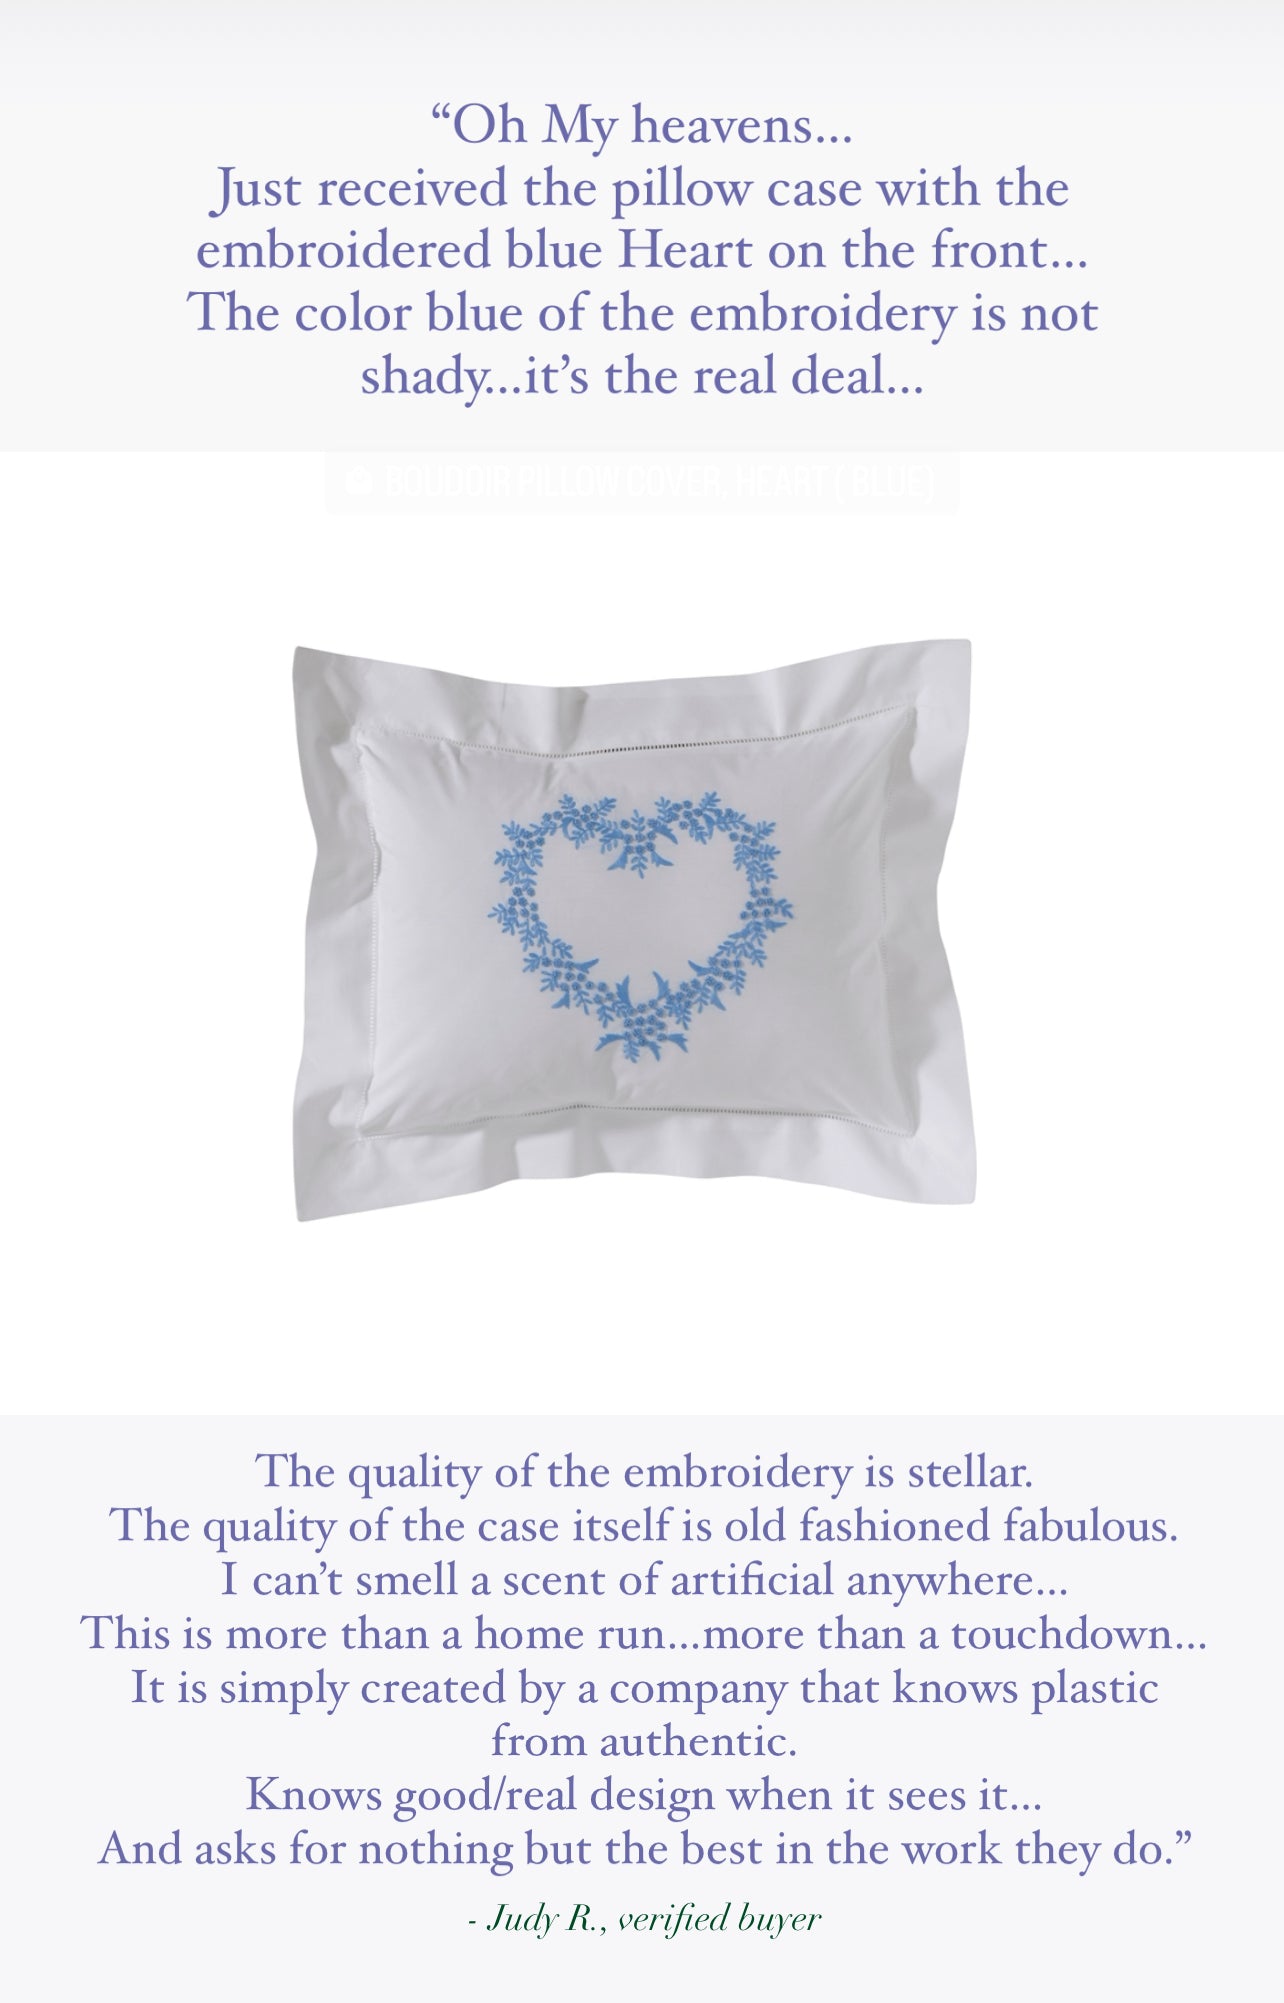 Boudoir Pillow Cover, Embroidered with Hem Stitch Border - Heart (Wedgewood Blue)